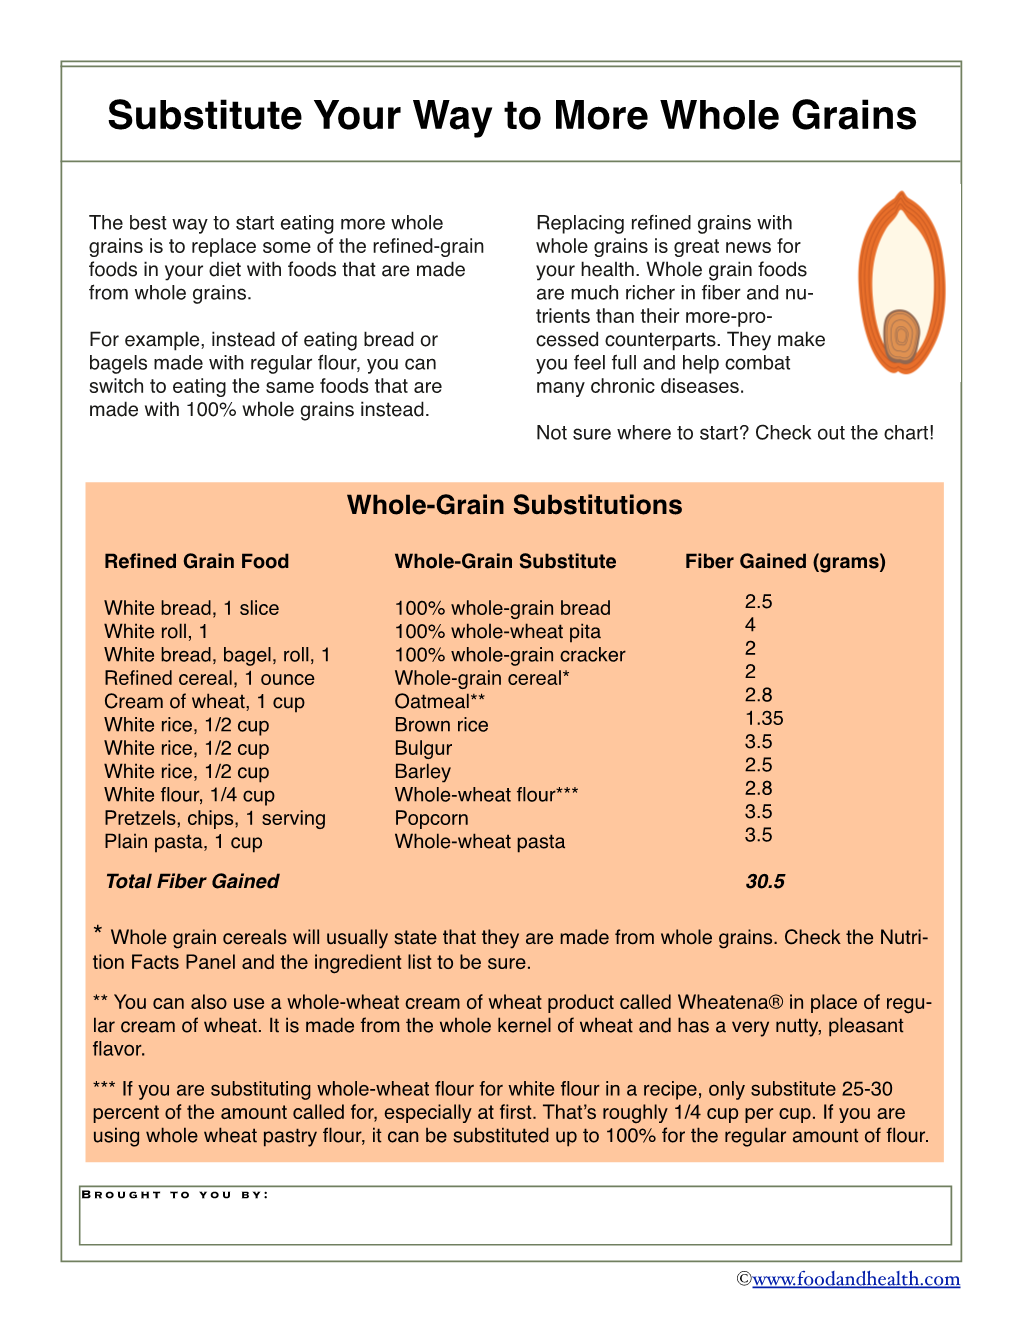 Use This Printable Whole Grain Handout to Help Folks Switch Out